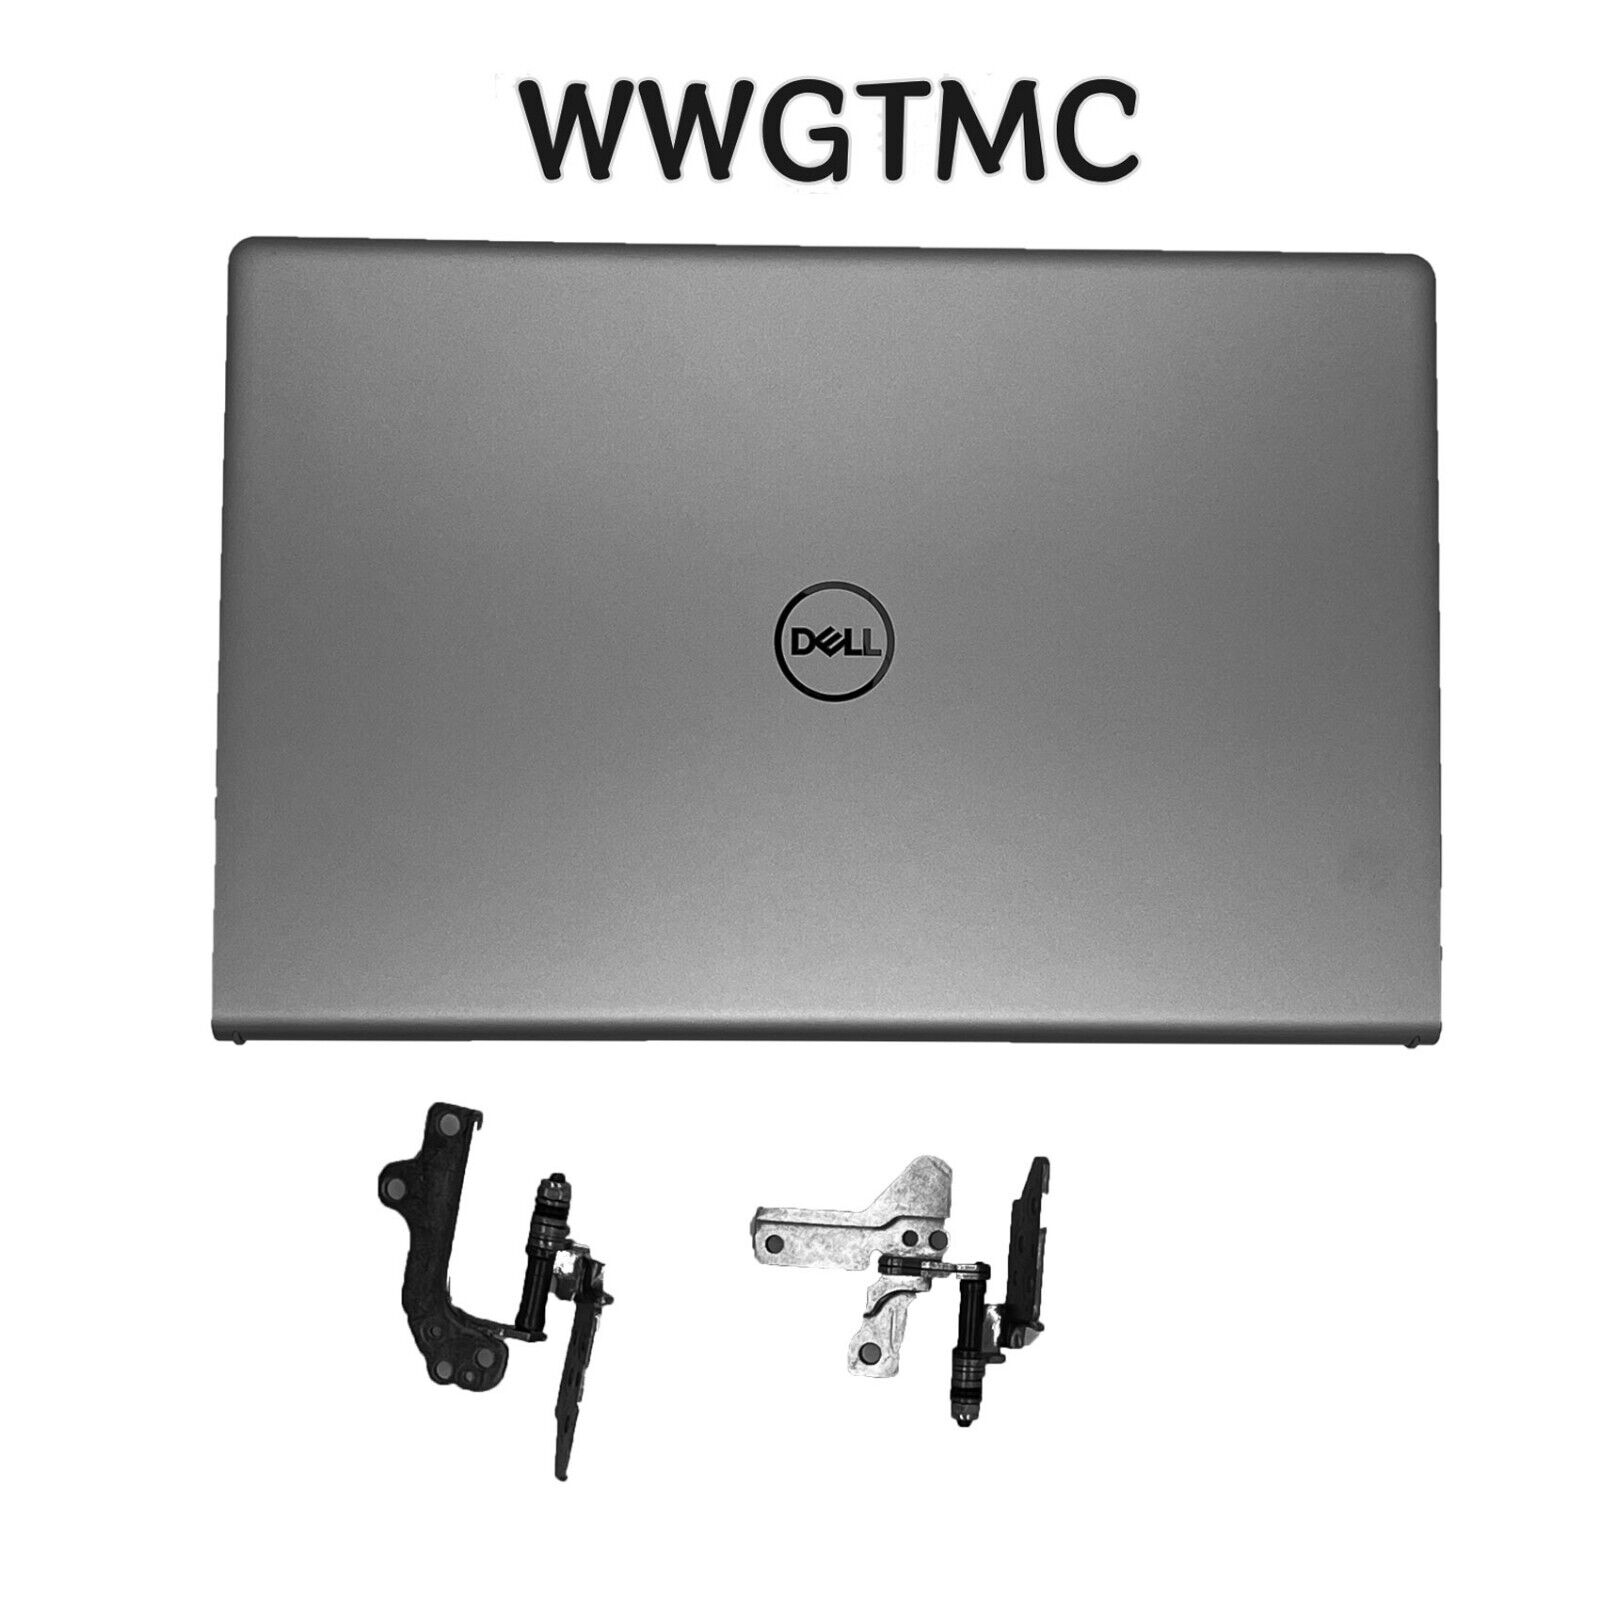 New For Dell Inspiron 15 3510 3511 3515 Laptop LCD Back Cover + Hinges 0DDM9D